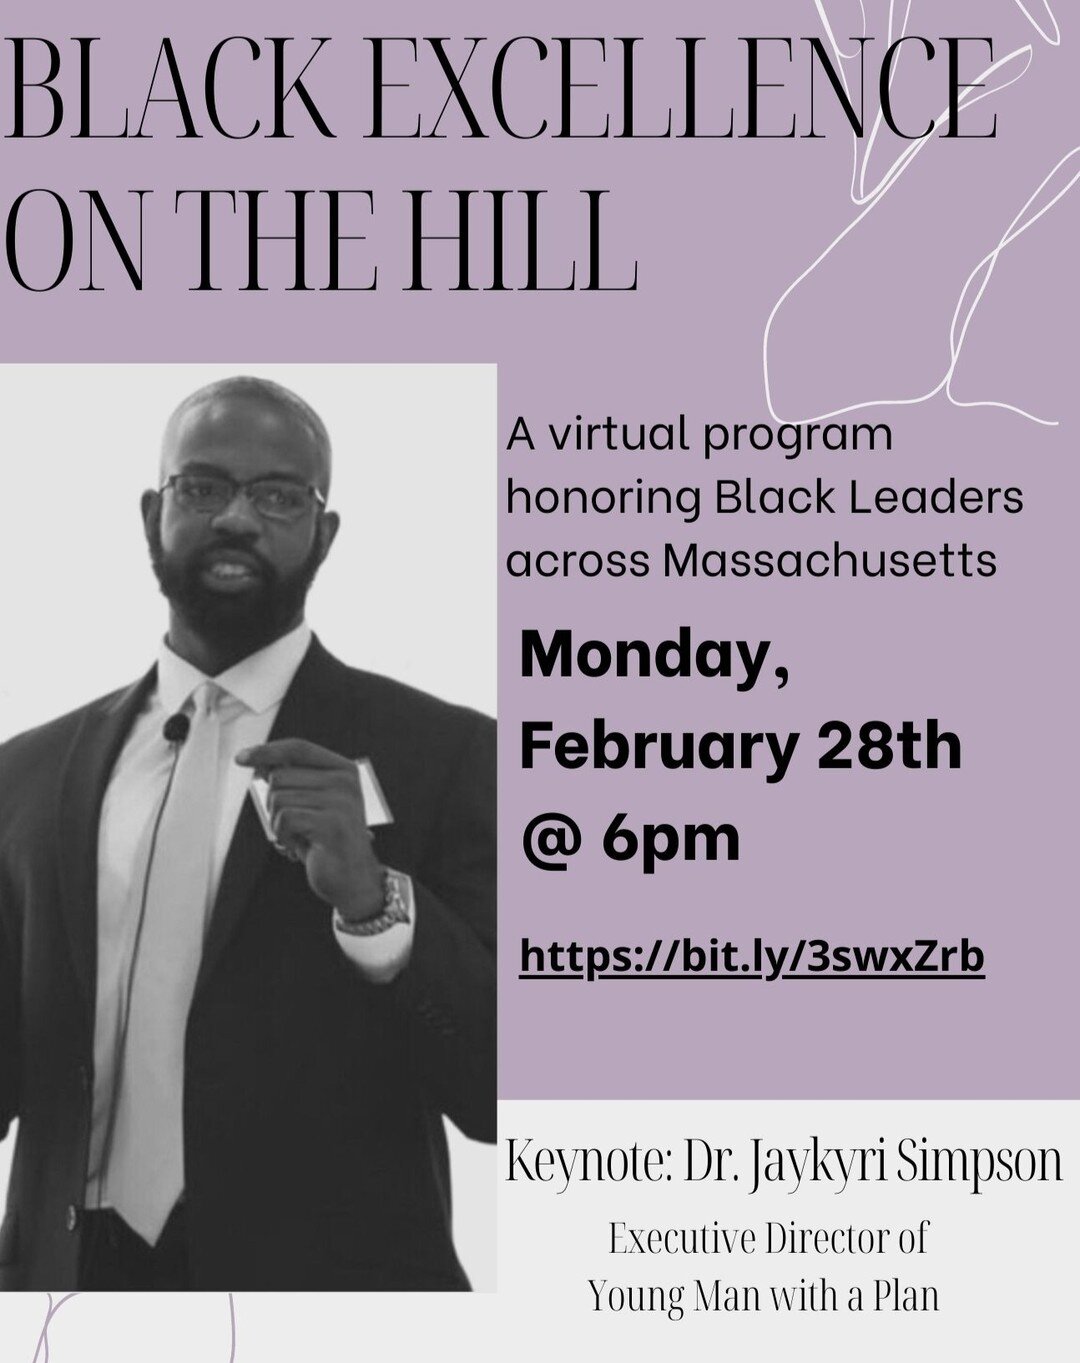 EVENT ANNOUCEMENT! Please join us virtually this coming Monday @ 6:00pm EST for the MBLLC's premier Black History Month event-- Black Excellence on the Hill!

Type the link located on the flyer in your browser to RSVP! Let us know in the comments if 